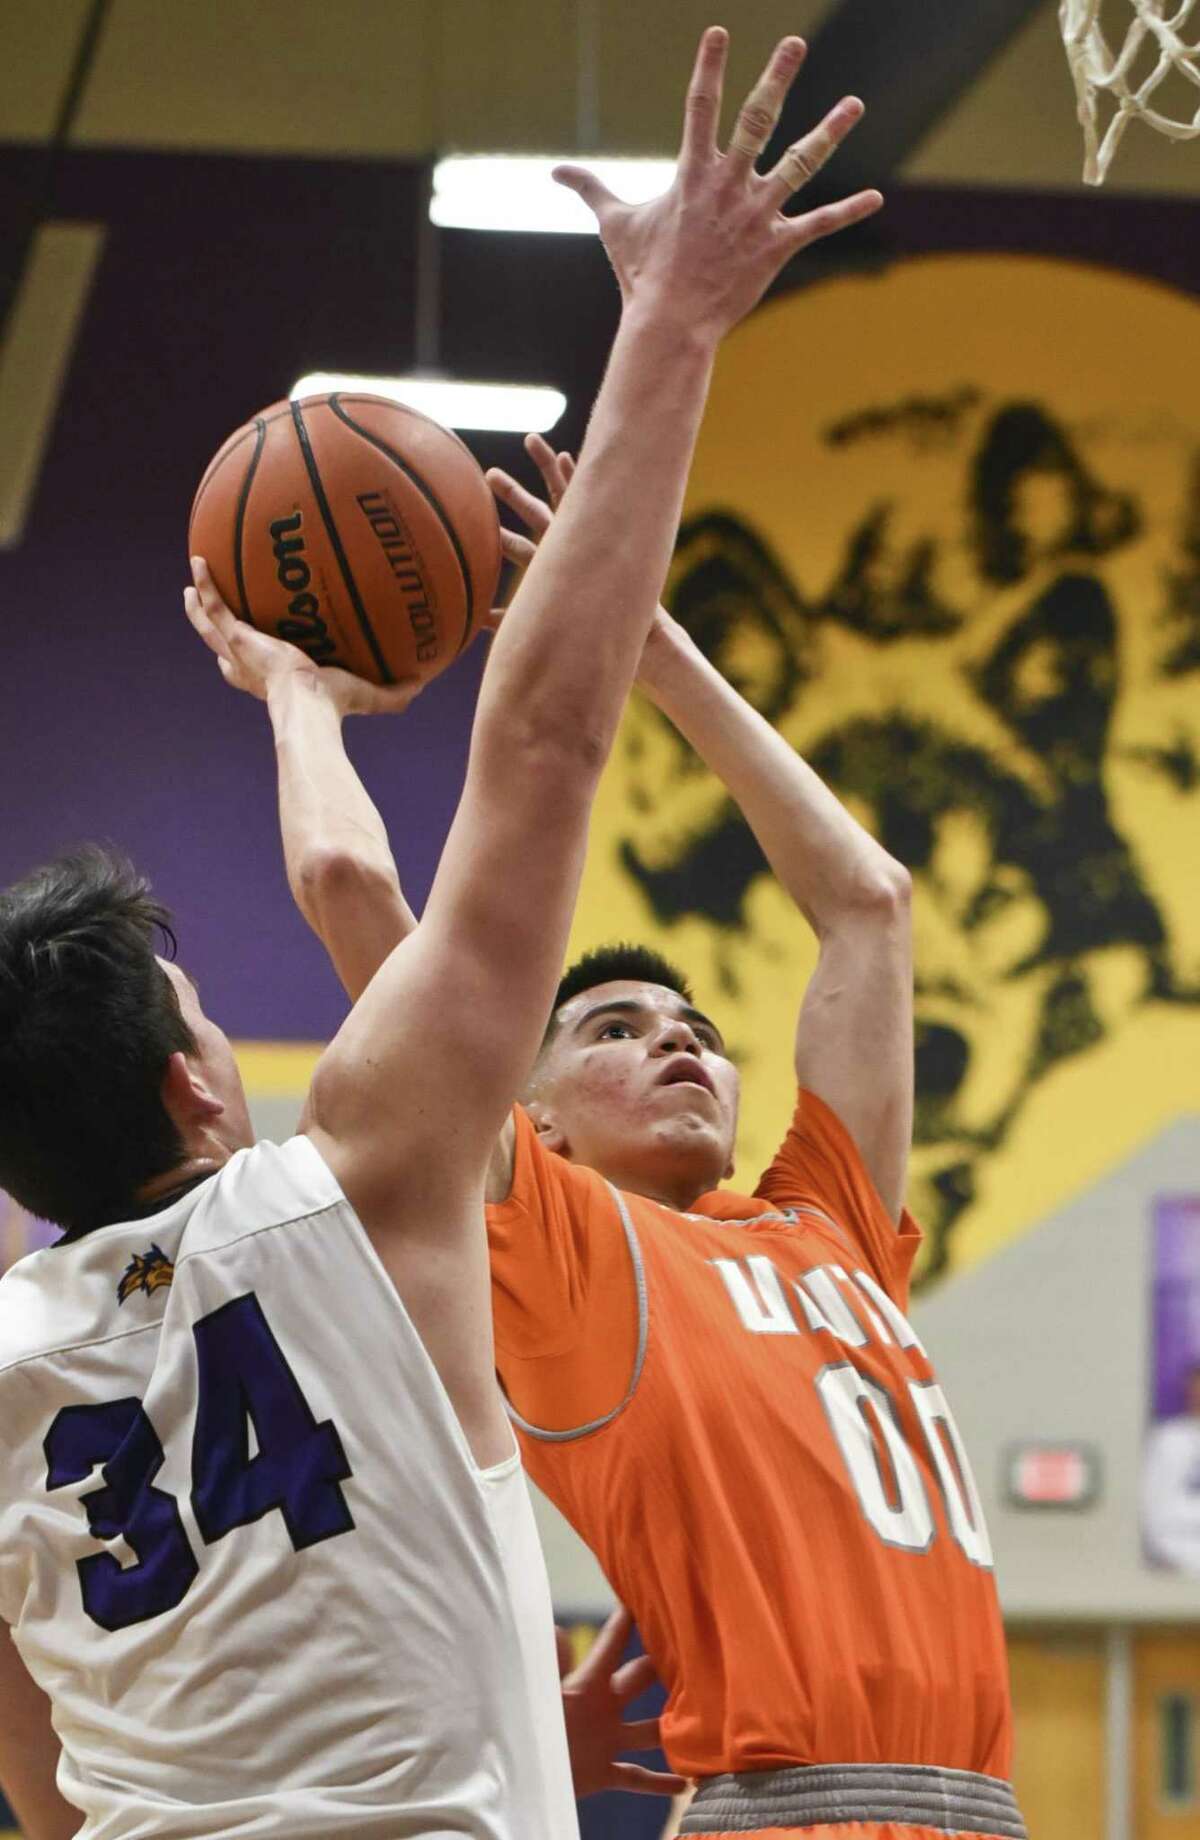 Sammy Esparza scored a team-high 19 points Monday in United’s 74-64 victory at Judson.